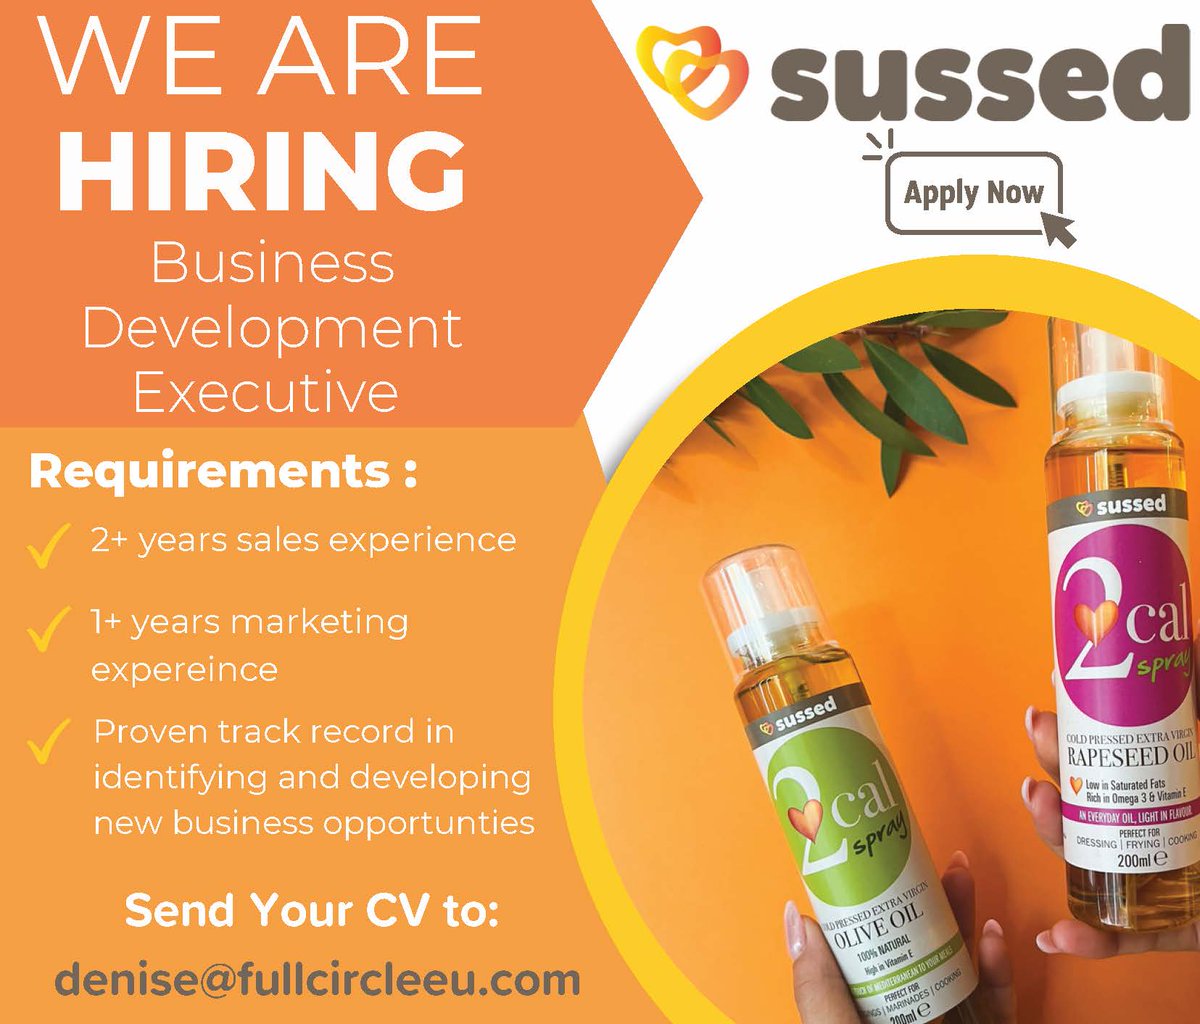 #HIRING: Business Development Executive
We are seeking to hire a Business Development Executive.
The candidate should be enthusiastic, passionate and hardworking with:
➡️ sales and marketing experience.
Send CV to denise@fullcircleeu.com
#sales #salesjob #Marketing #jobfairy